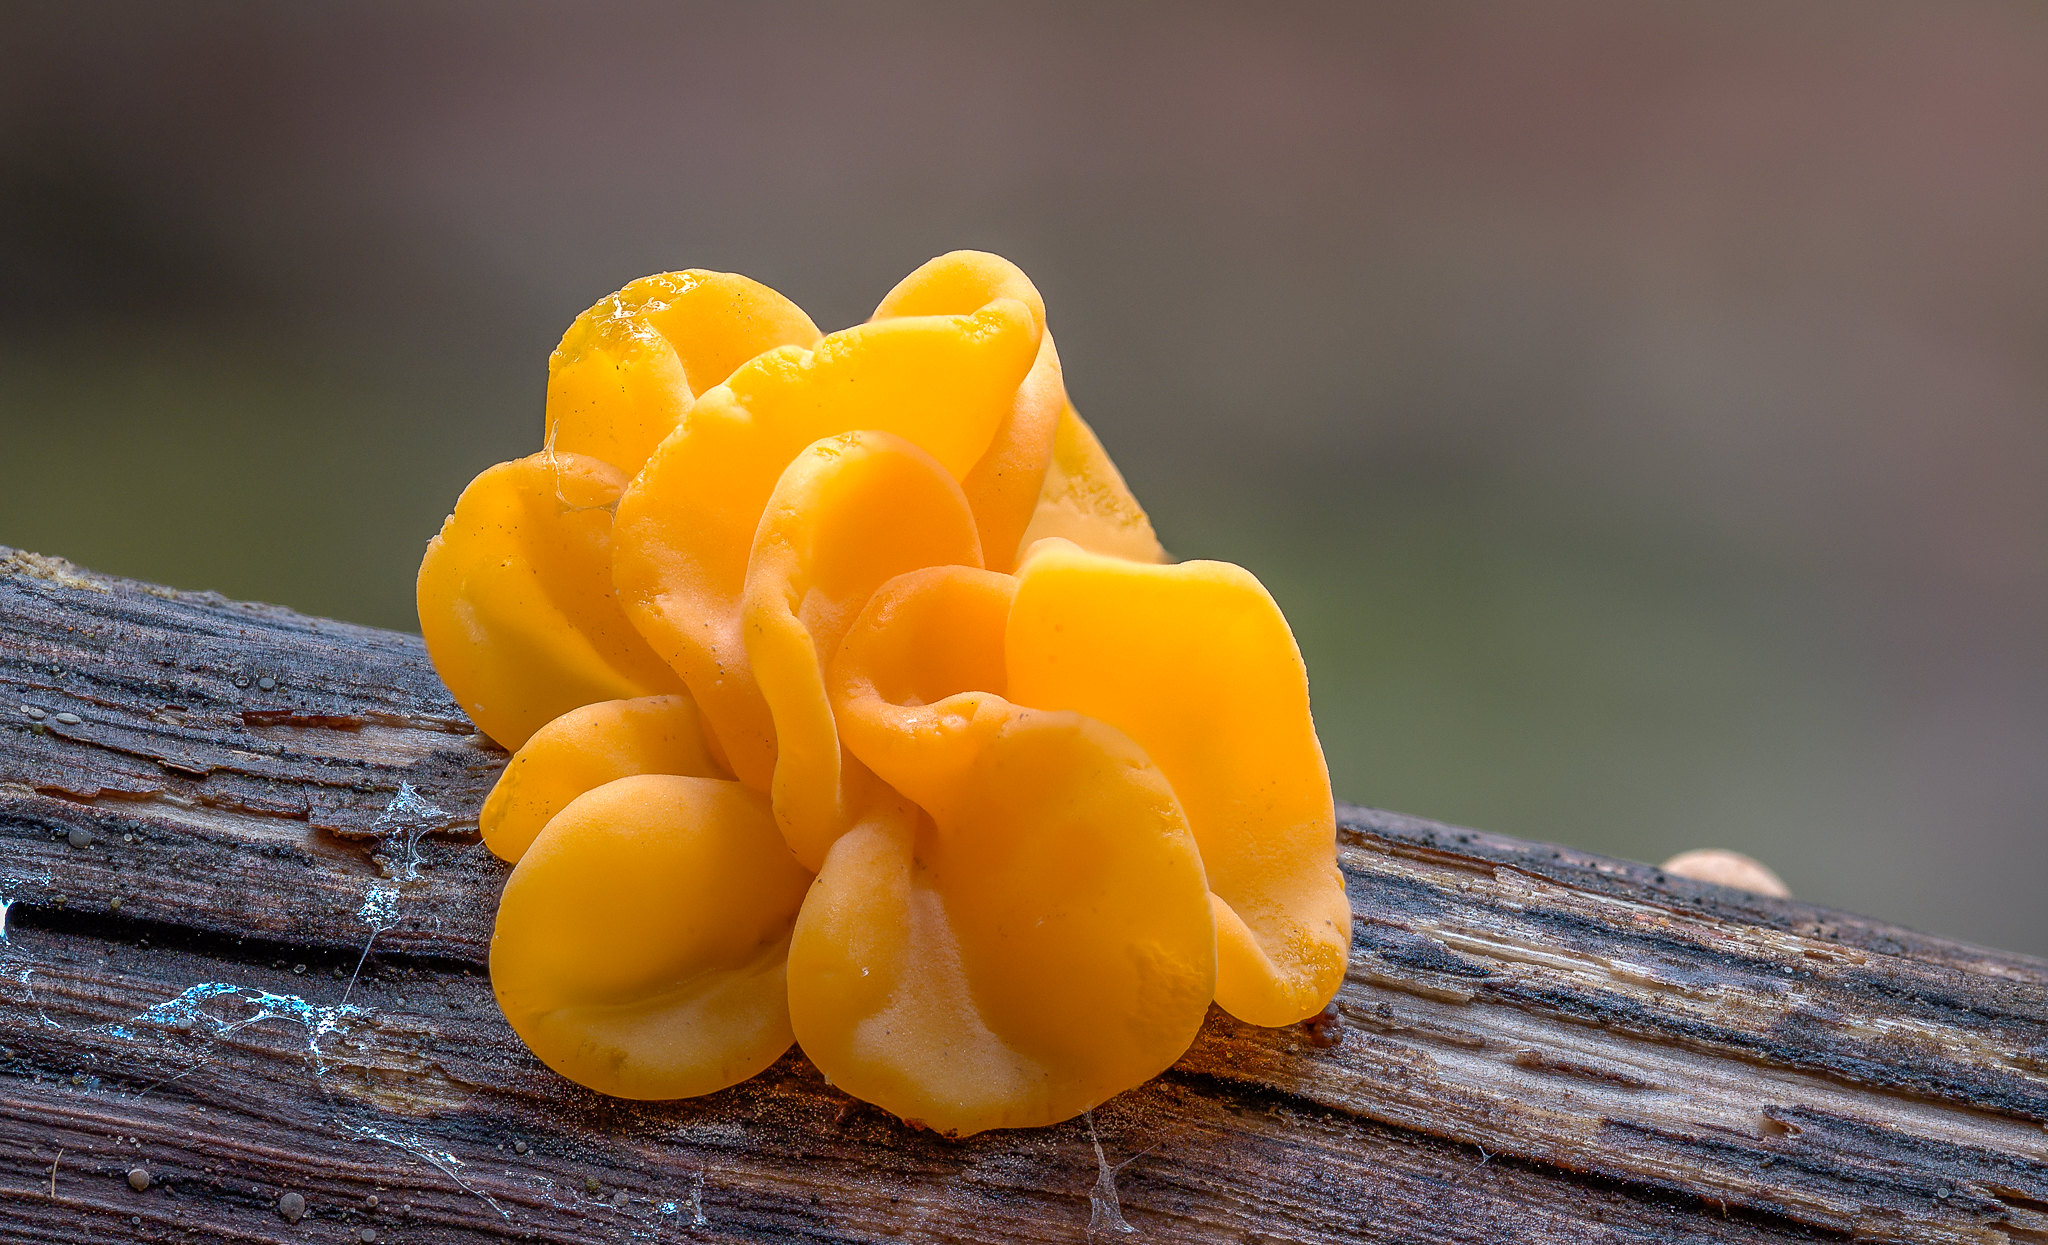 A bright orange fungus known as "Witch's Butter." (photo © Patrick Schifferli via the Flickr Creative Commons)